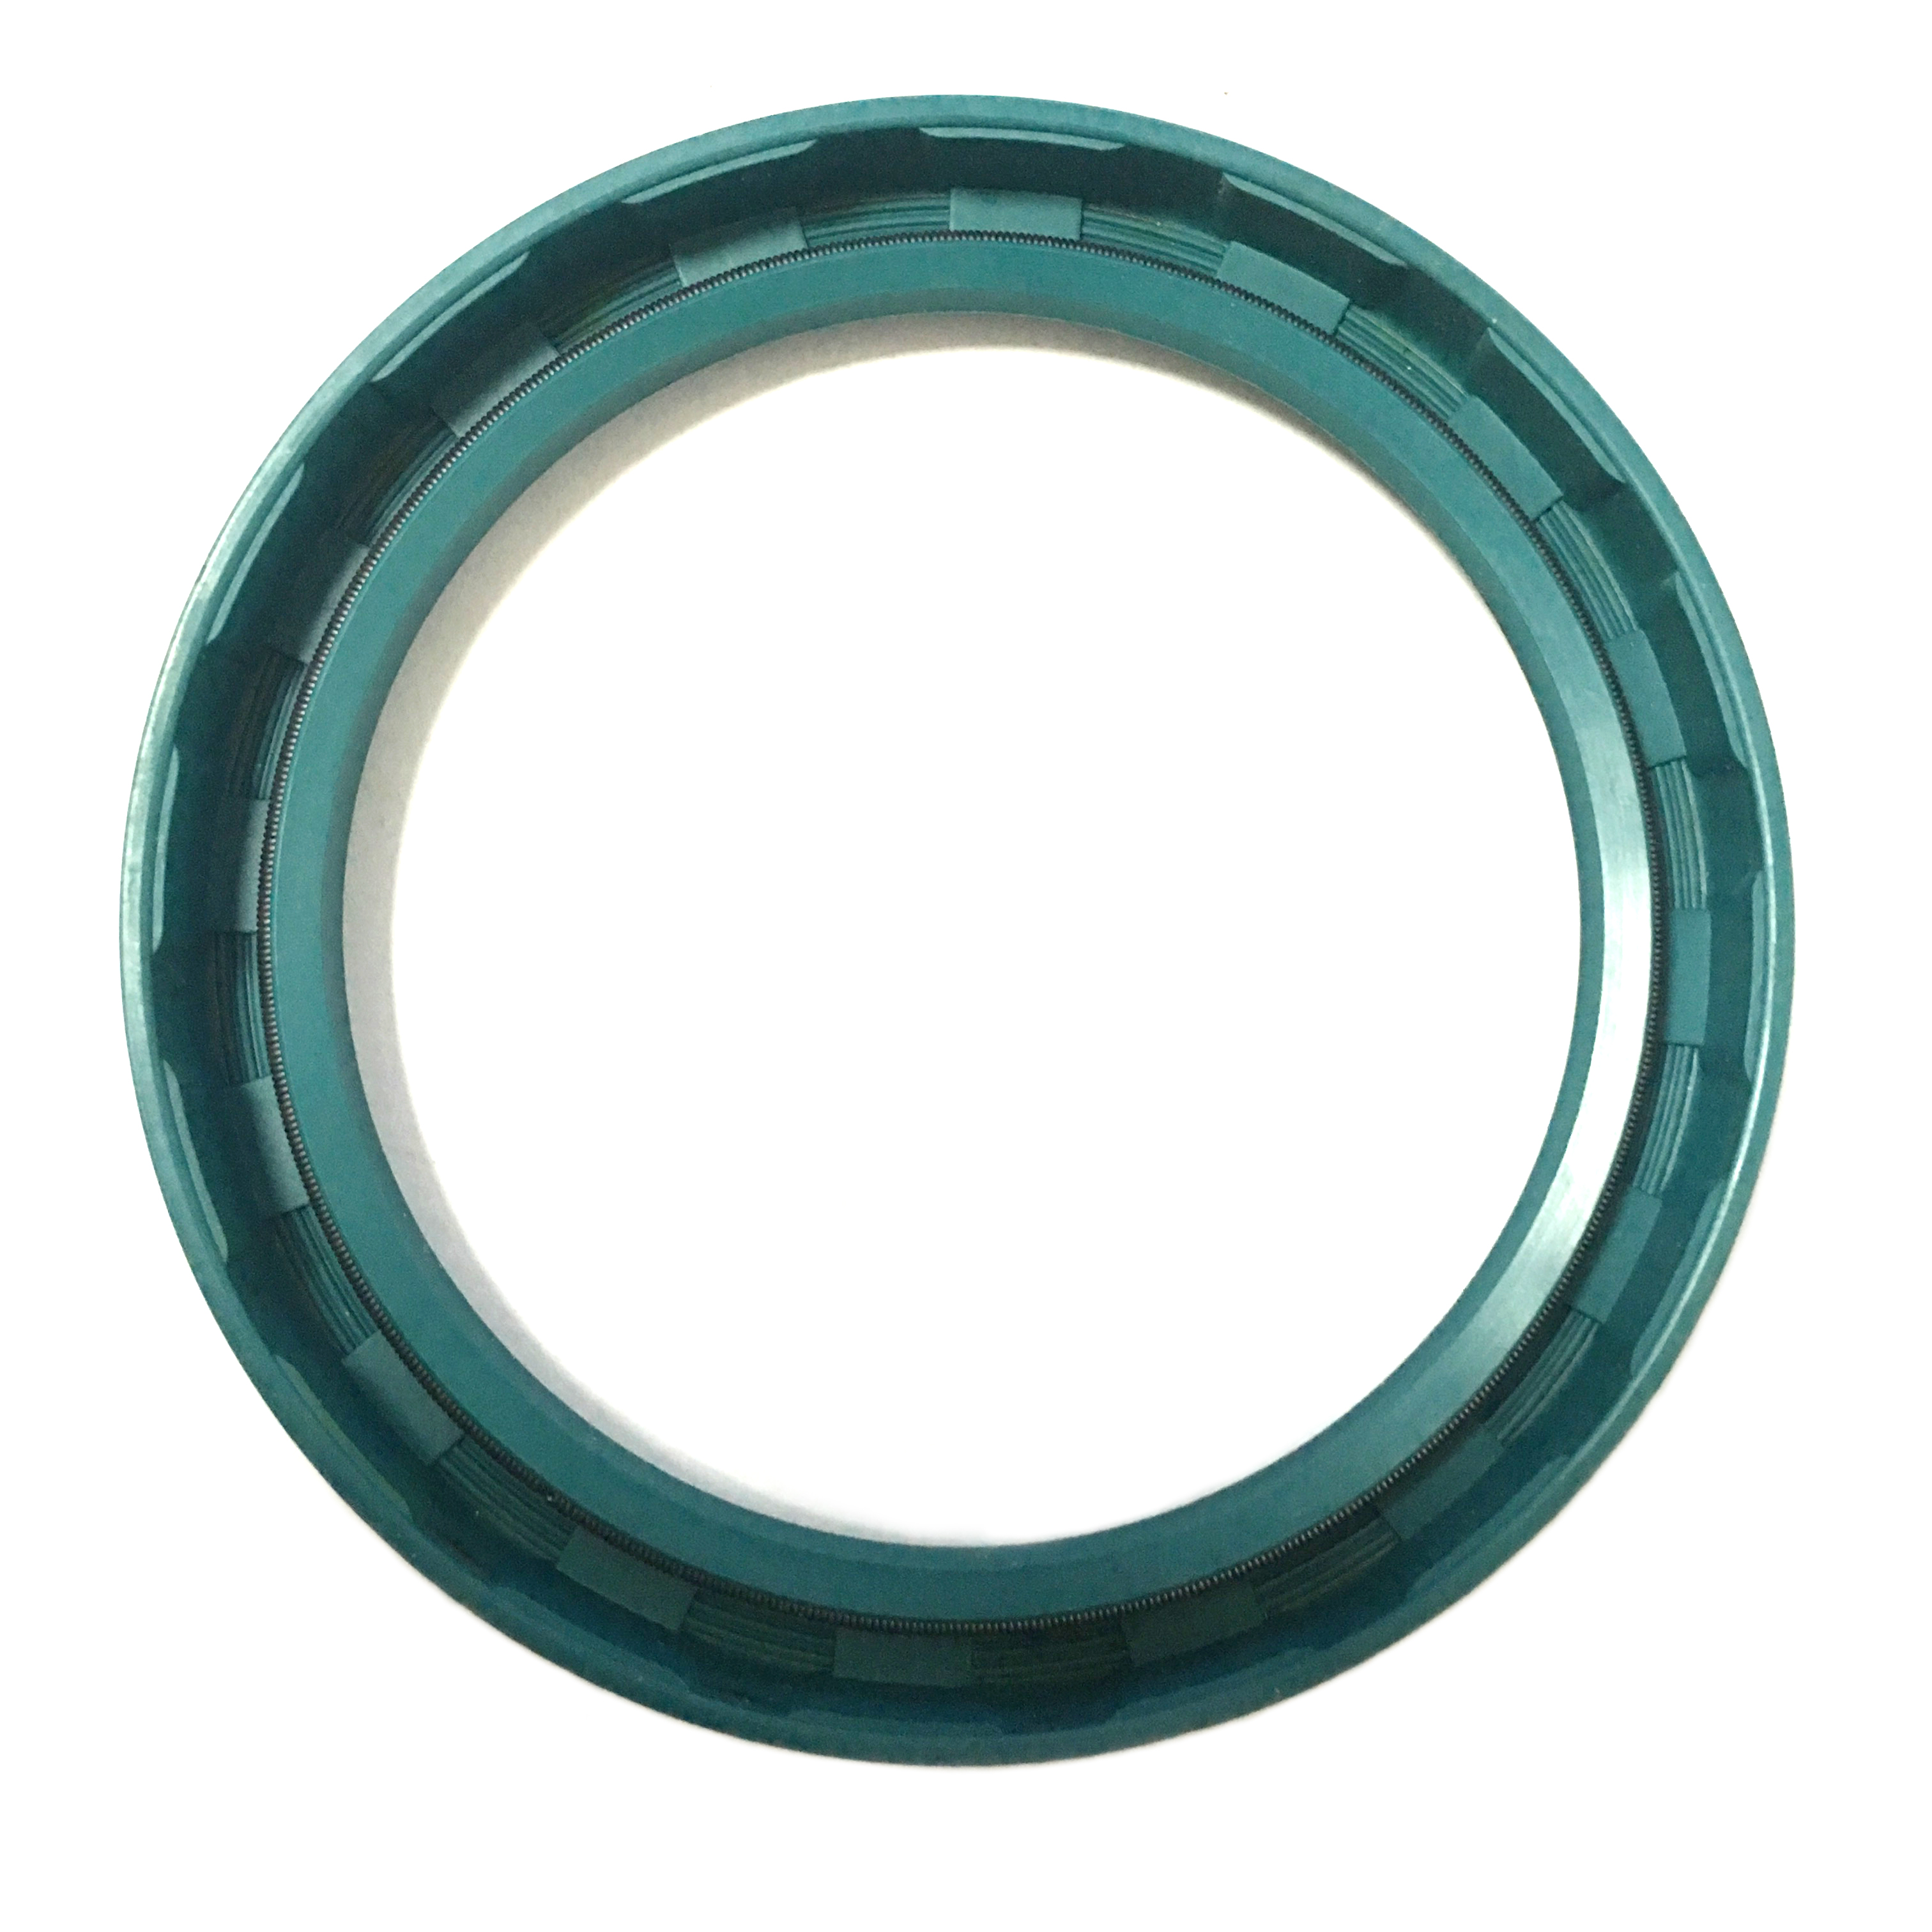 MERCEDES-BENZ And MAN Oil Seal SC 75*95*10